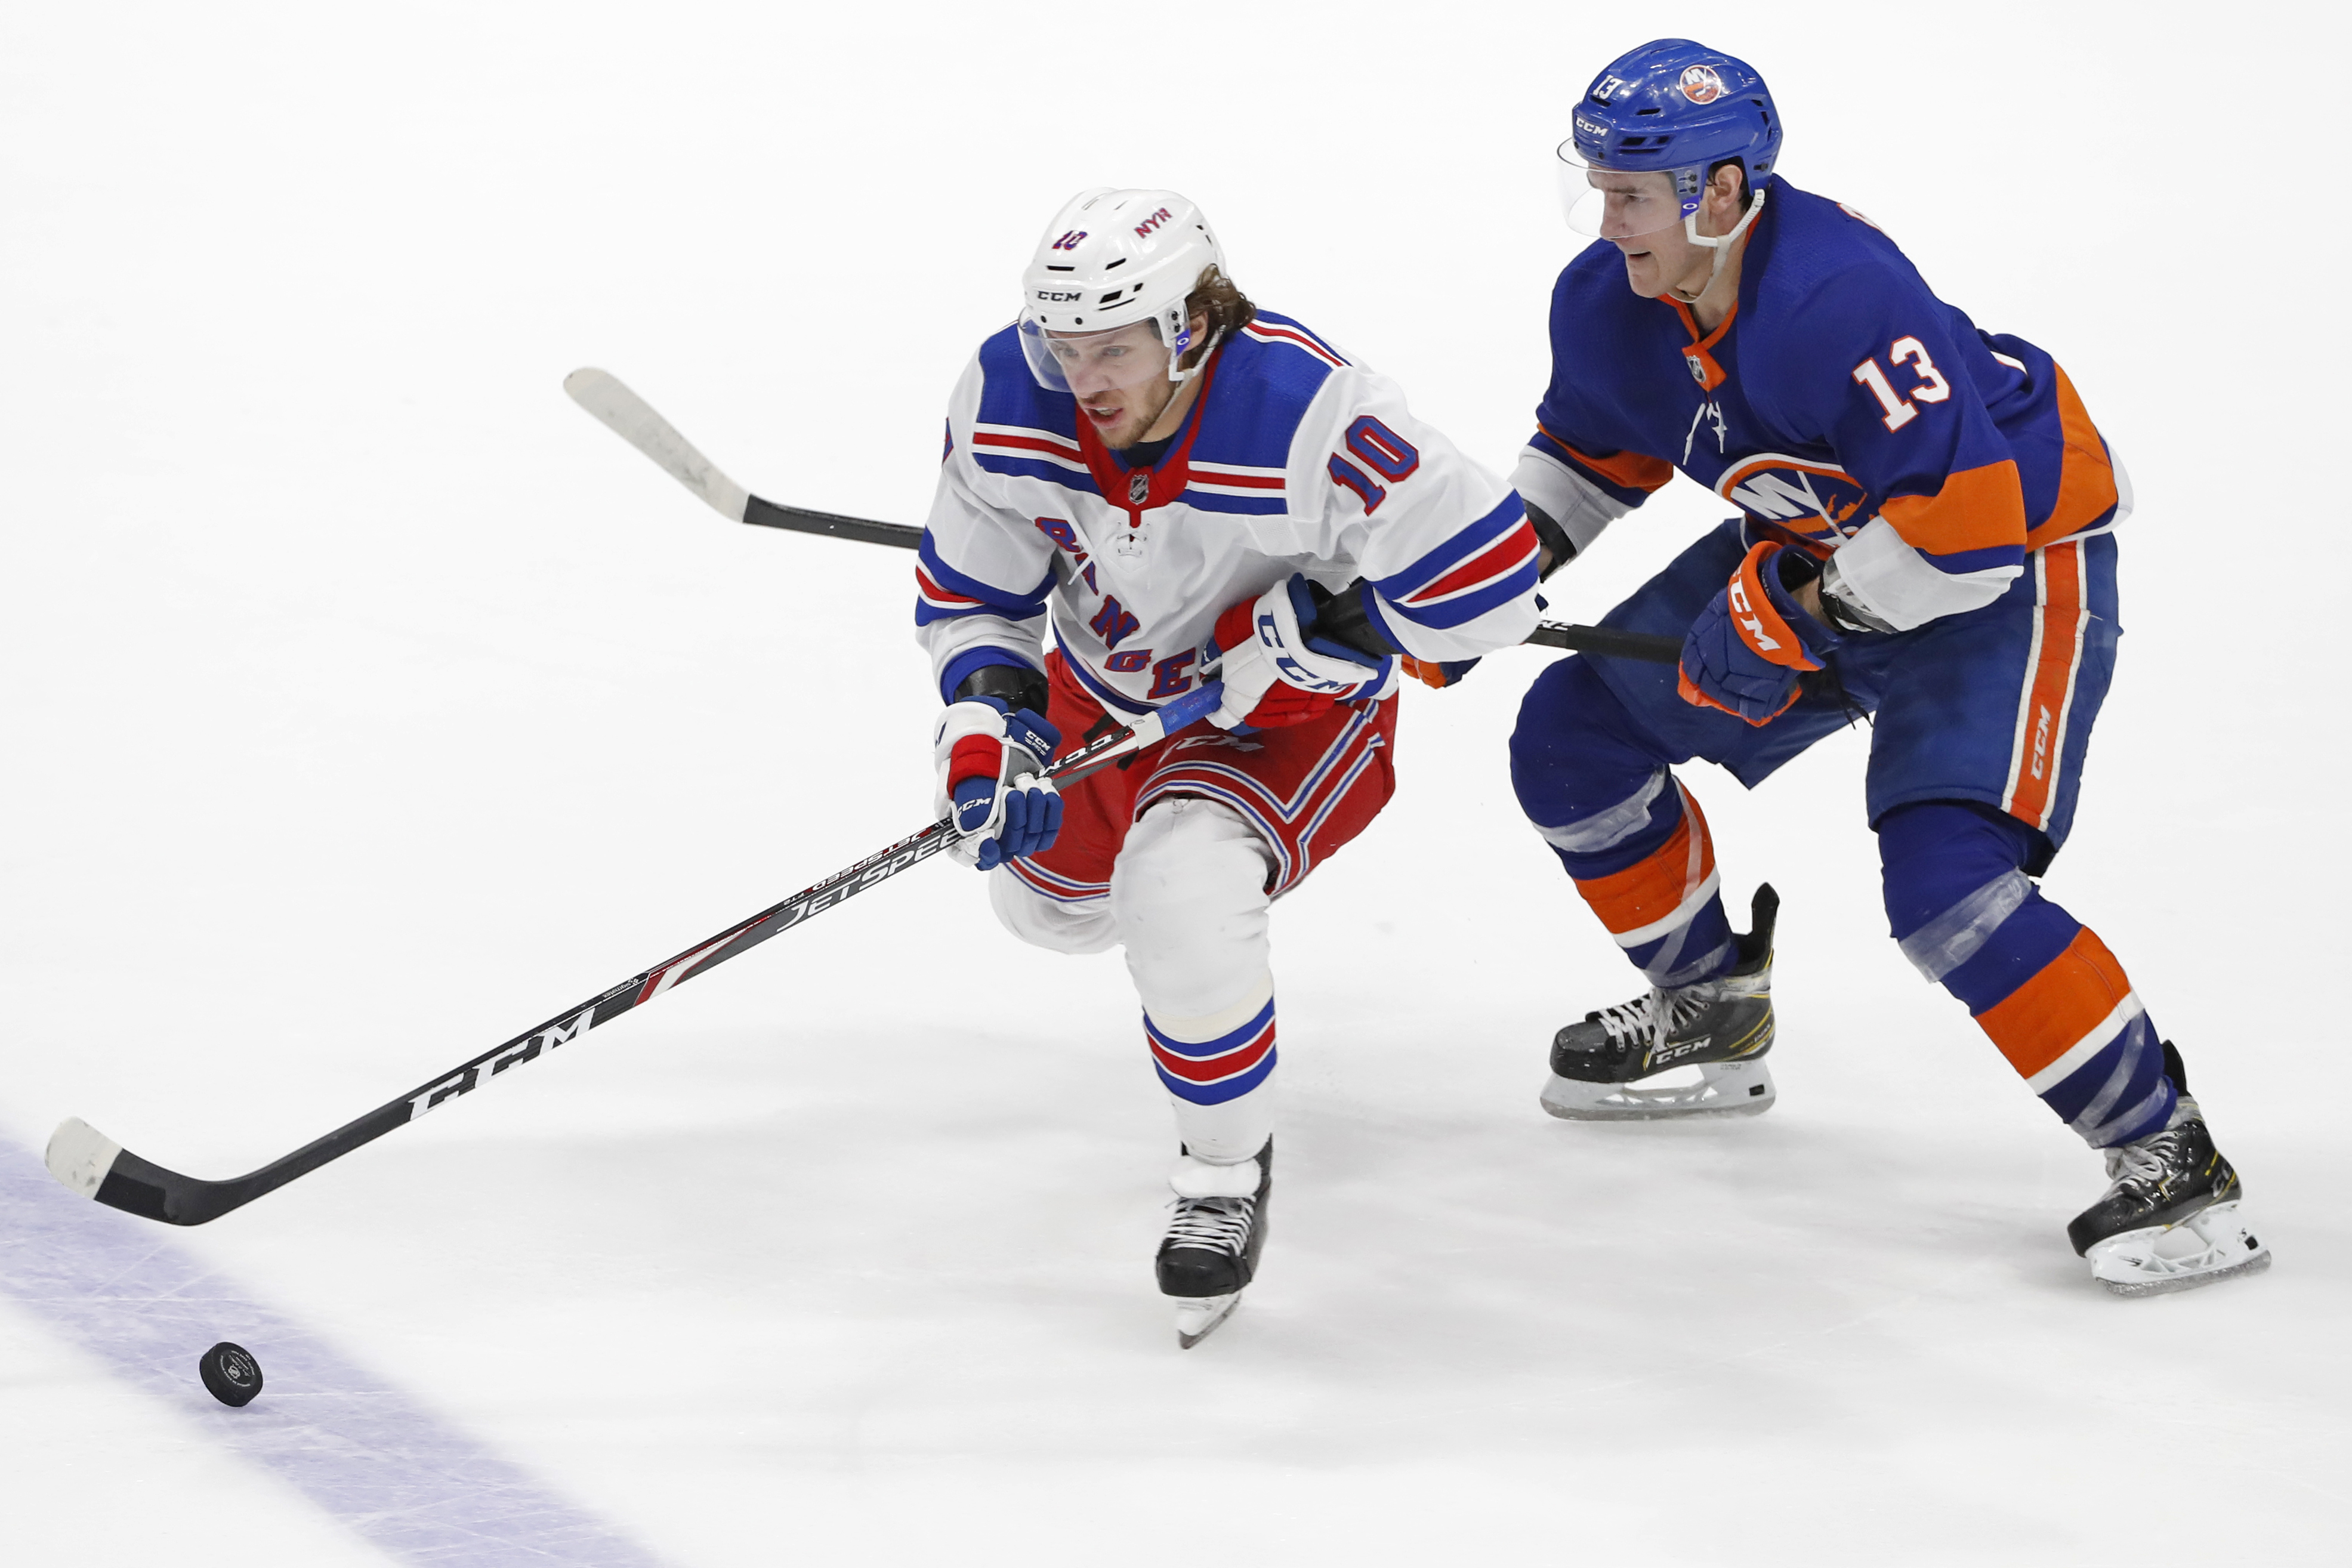 NHL Opening Week How to LIVE STREAM FREE the New York Islanders at New York Rangers Thursday (1-14-21)